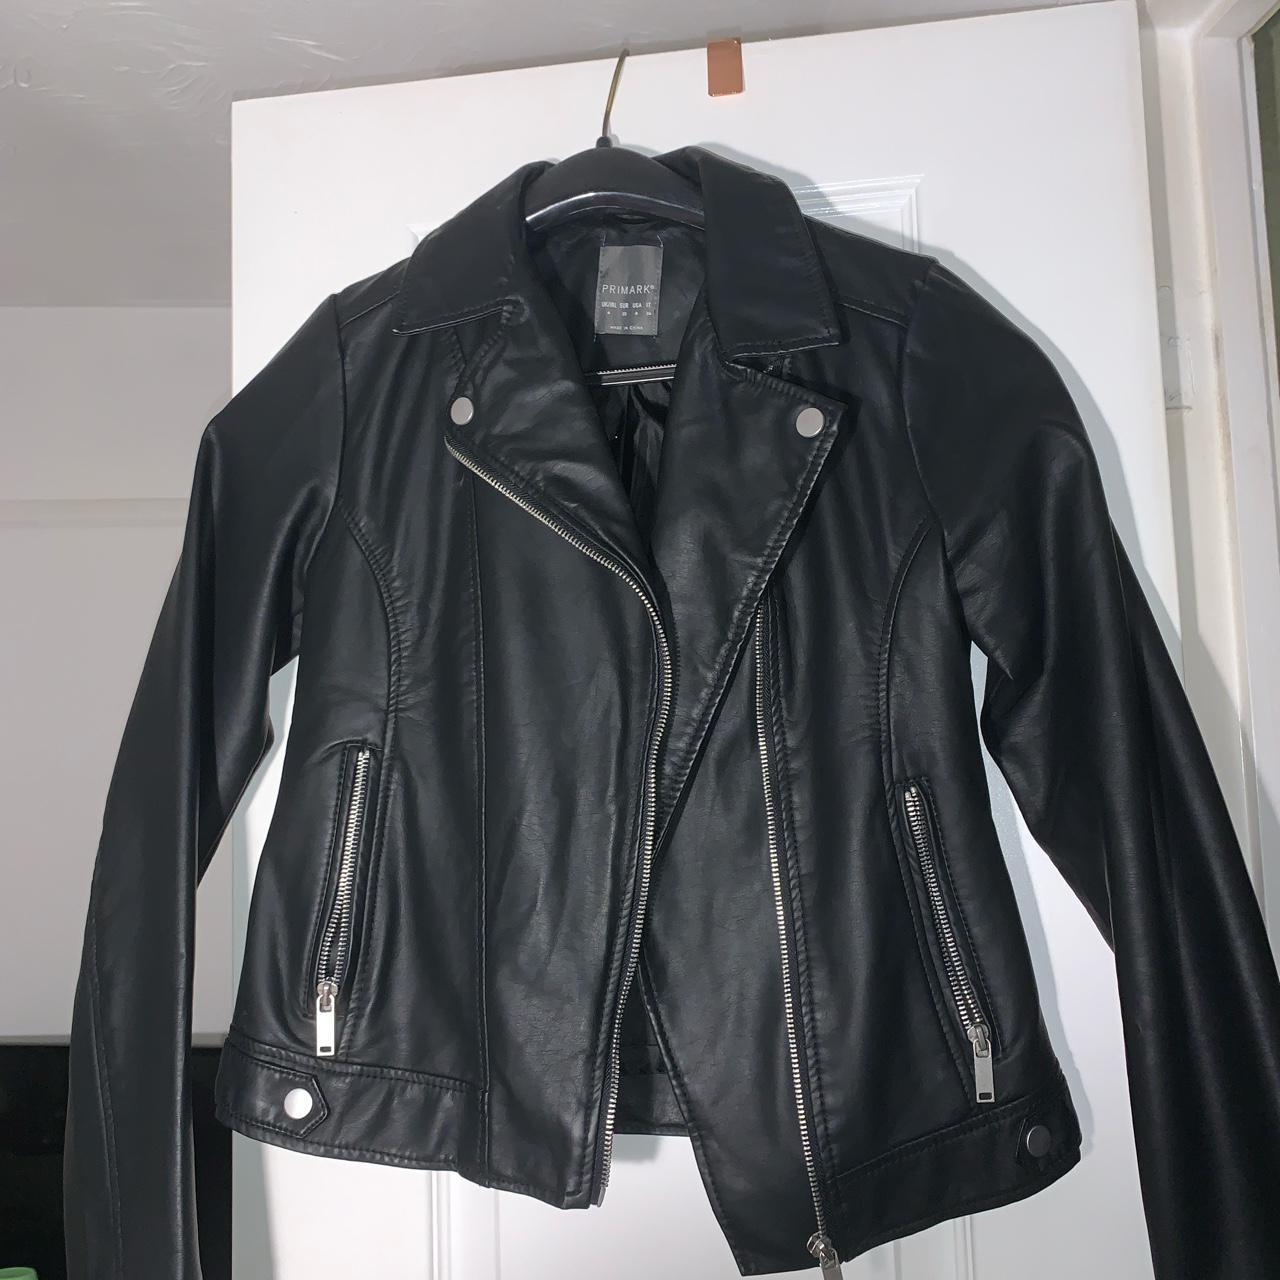 Black leather jacket Hardly worn - great condition... - Depop